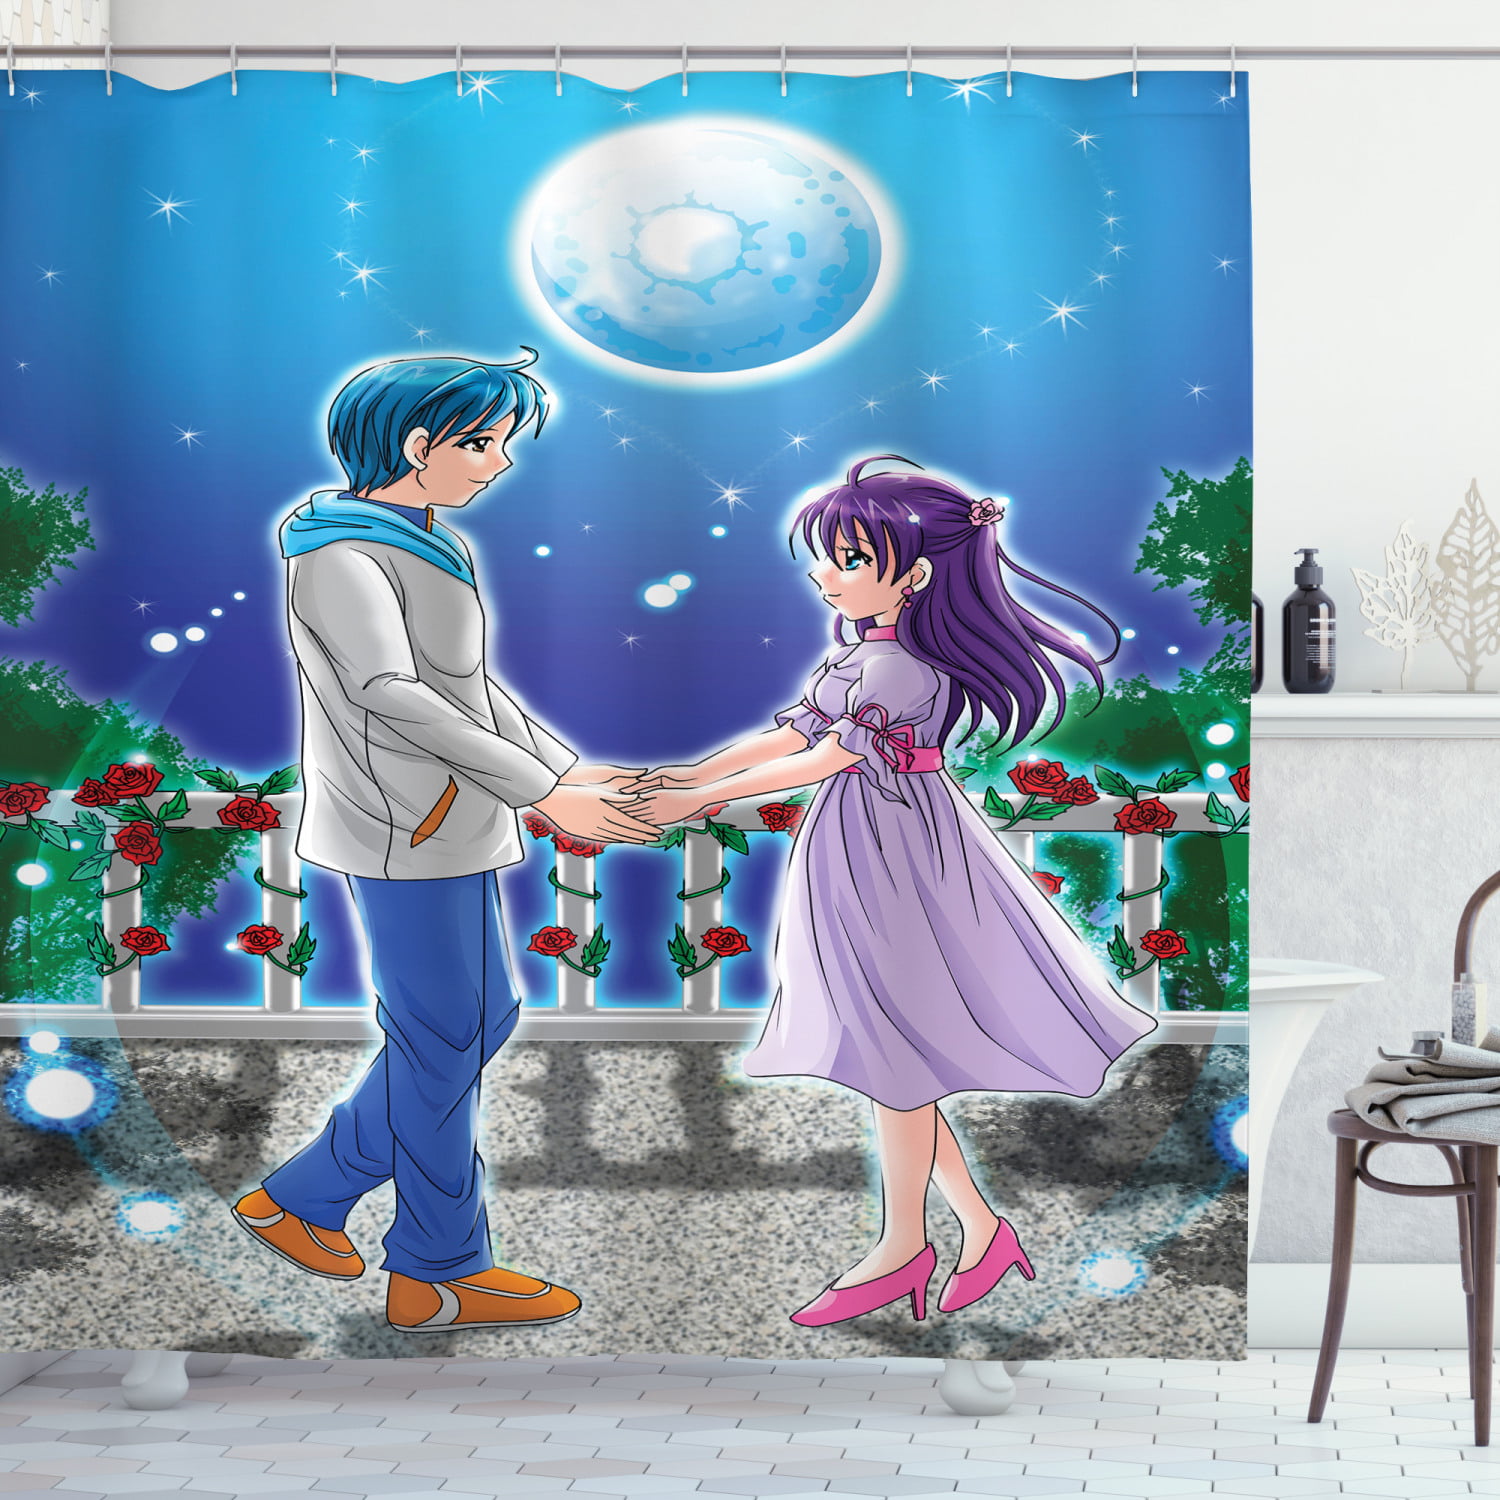 Anime Shower Curtain, Illustration of Romantic Couple Holding Hands under  Moonlight Love in Manga Themed Print, Fabric Bathroom Set with Hooks, 69W X  84L Inches Extra Long, Multi, by Ambesonne 